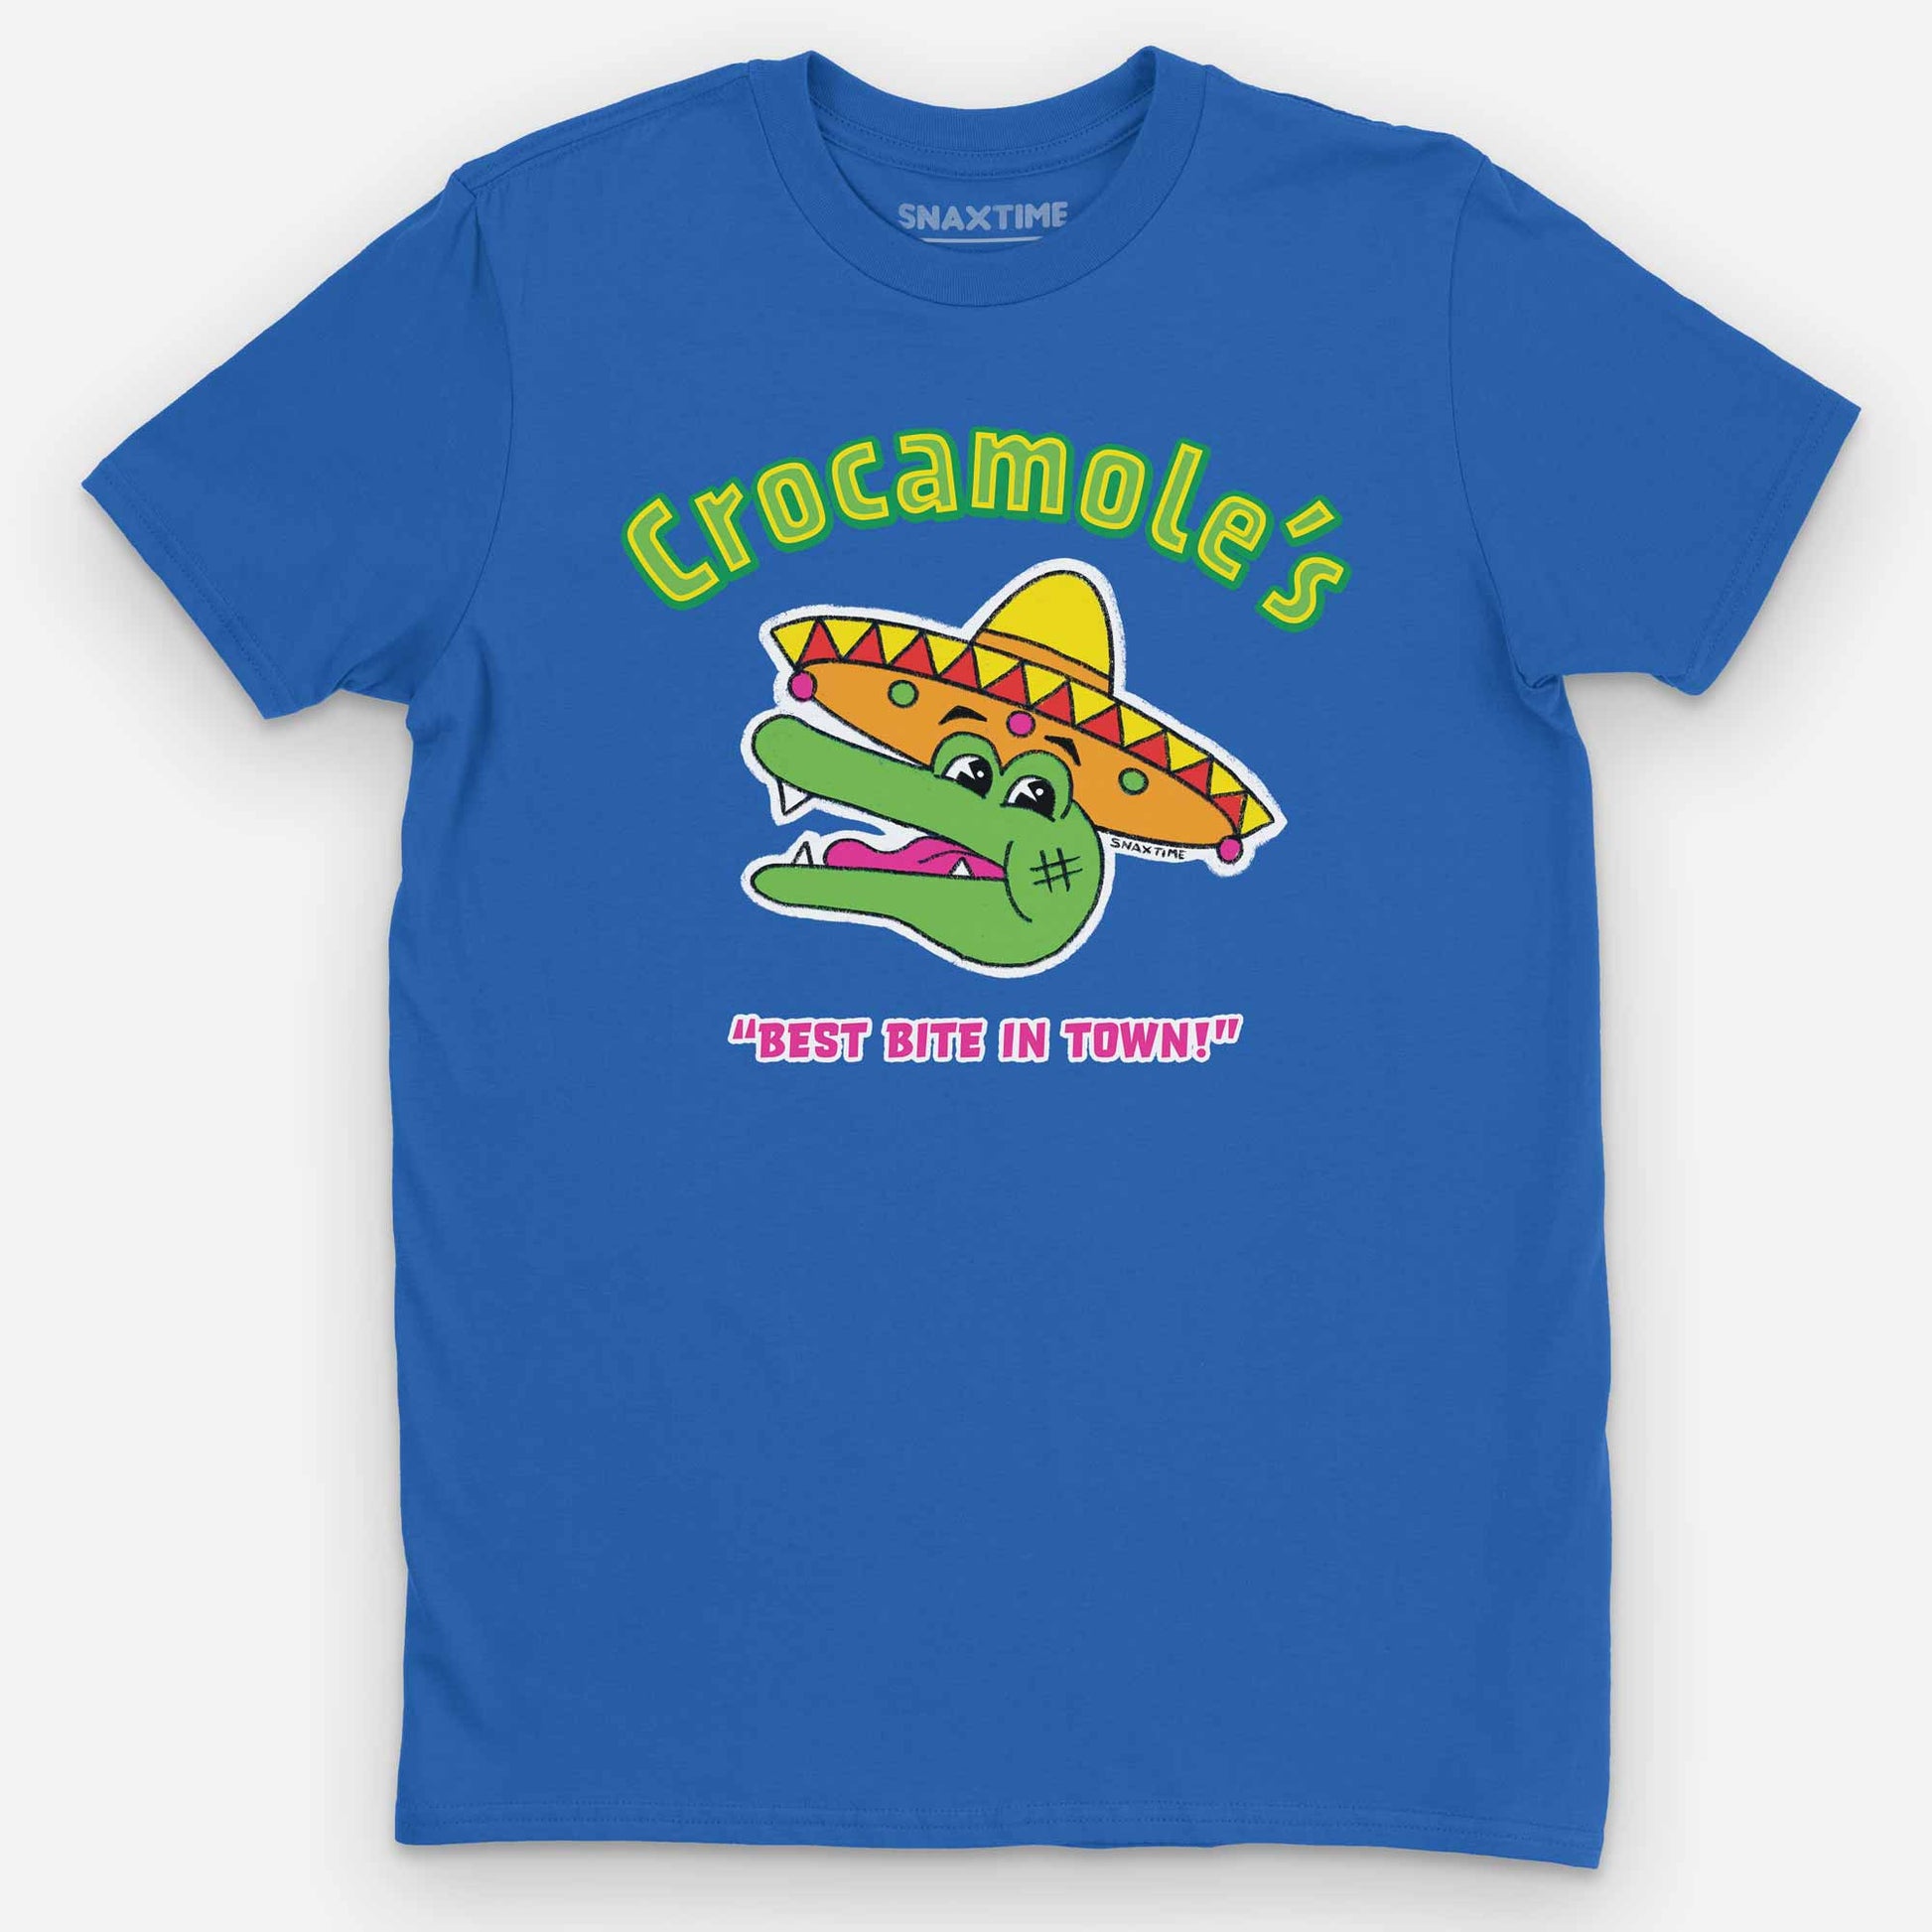 "Crocamole's" Mexican Restaurant Graphic T-Shirt - Snaxtime Retro Style Food Apparel